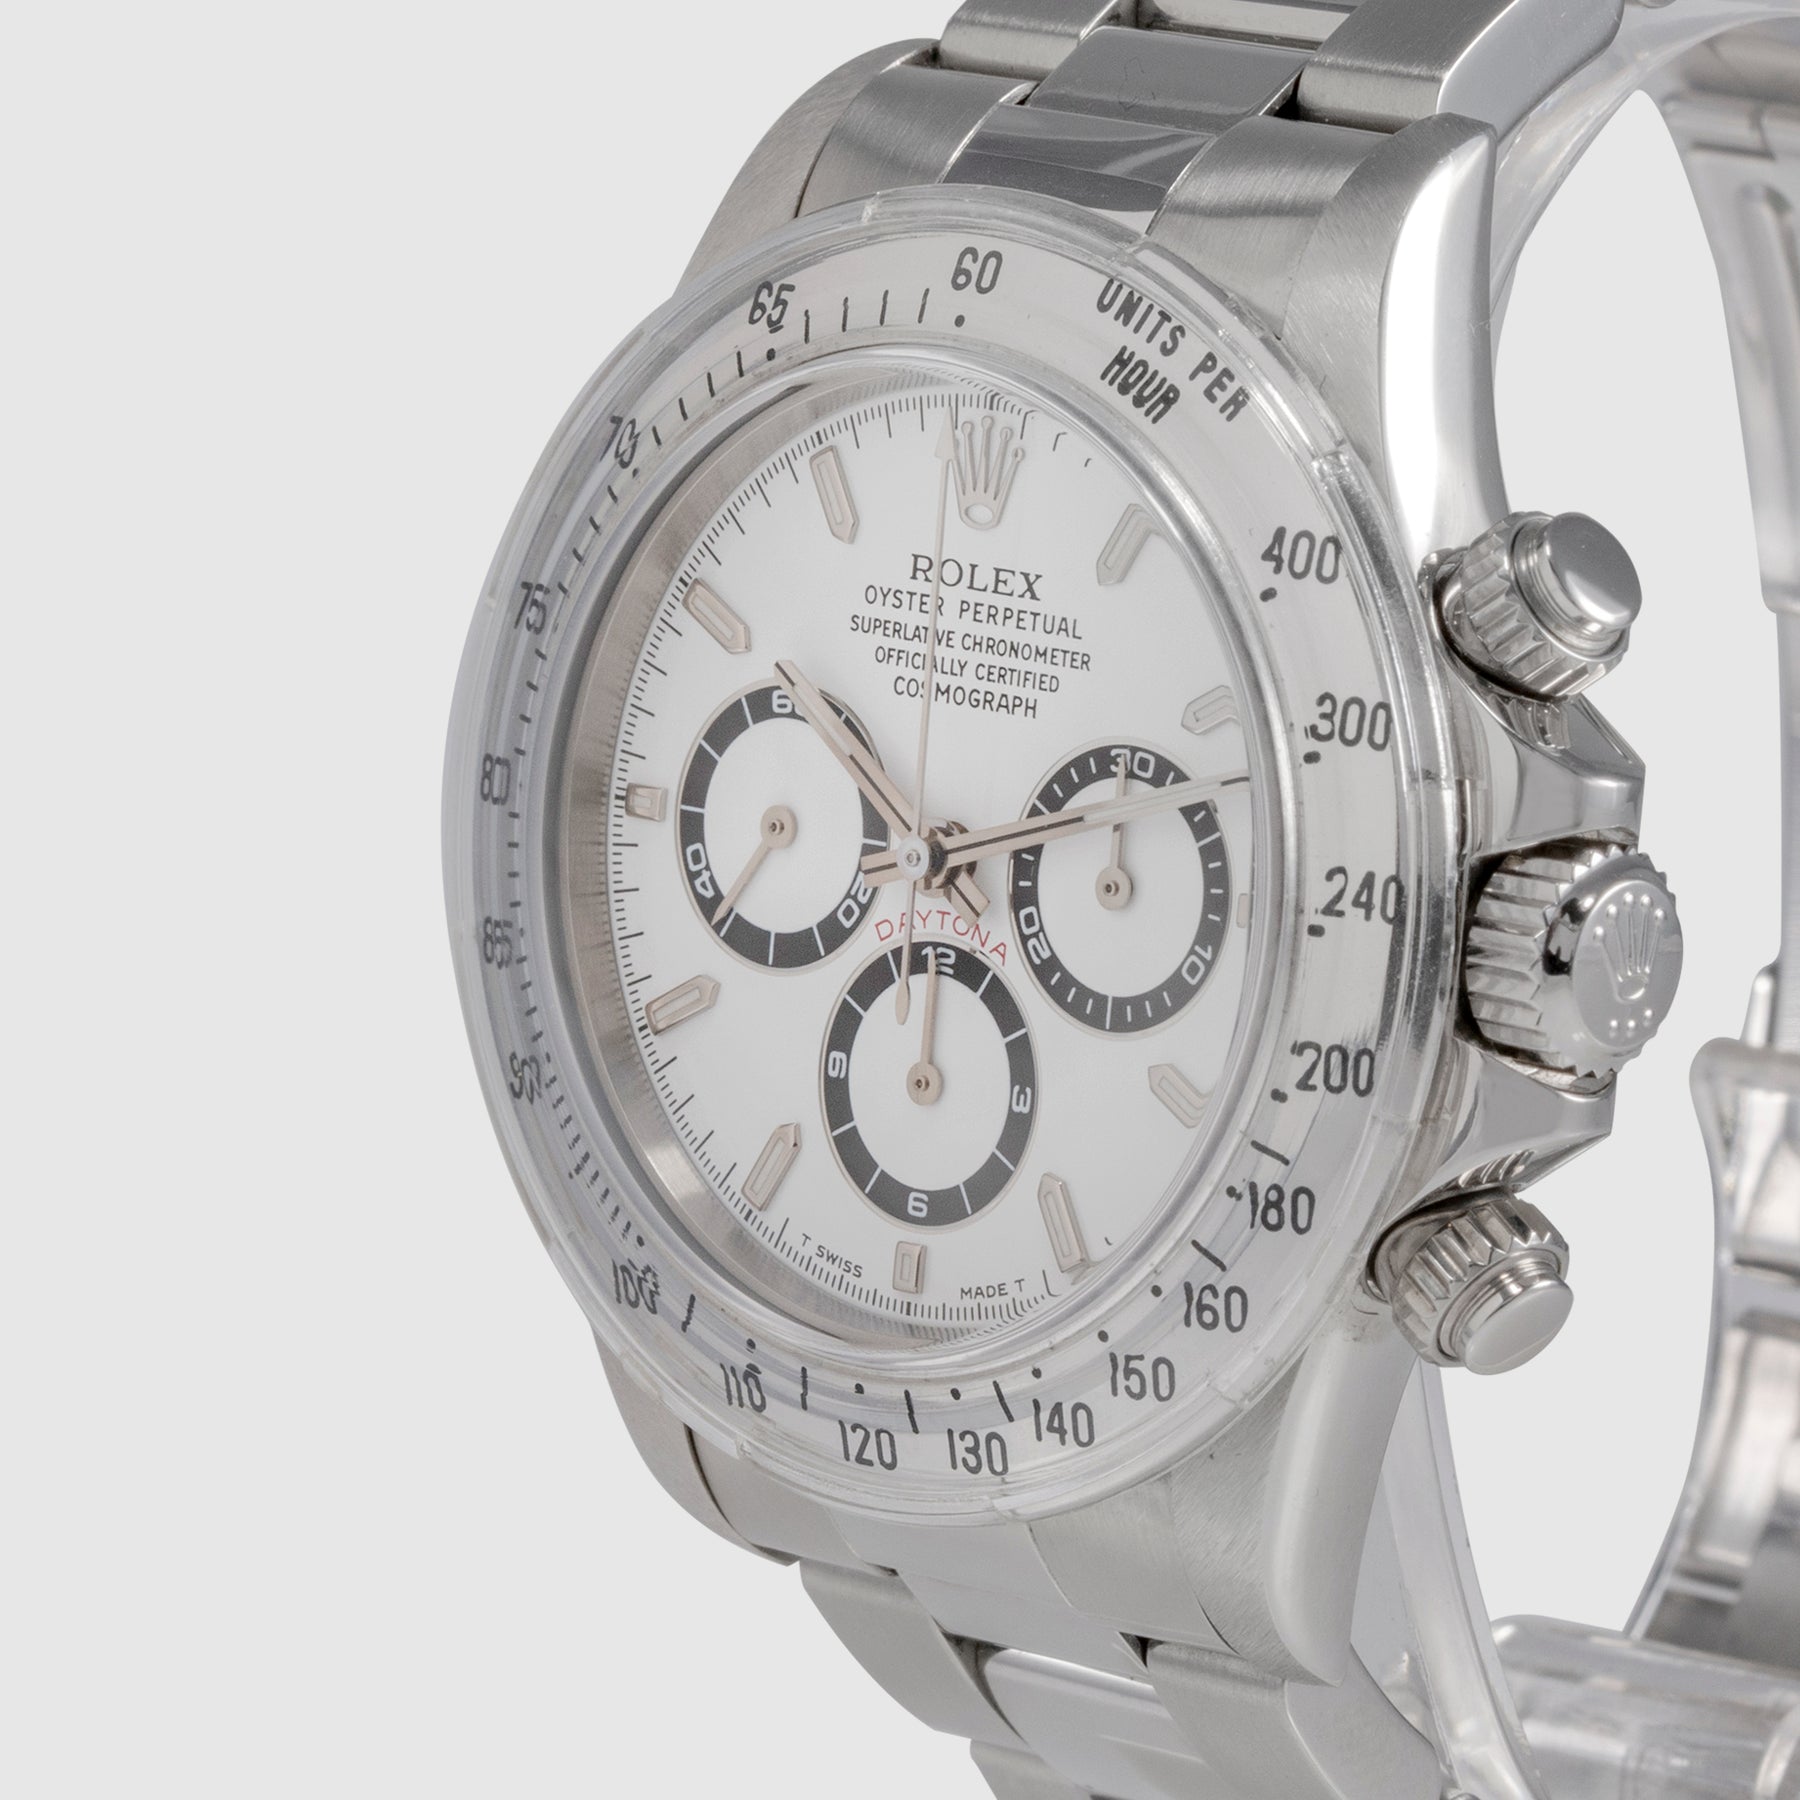 1997 Rolex Daytona White Dial New Old Stock Ref. 16520 (With Box and Booklets)